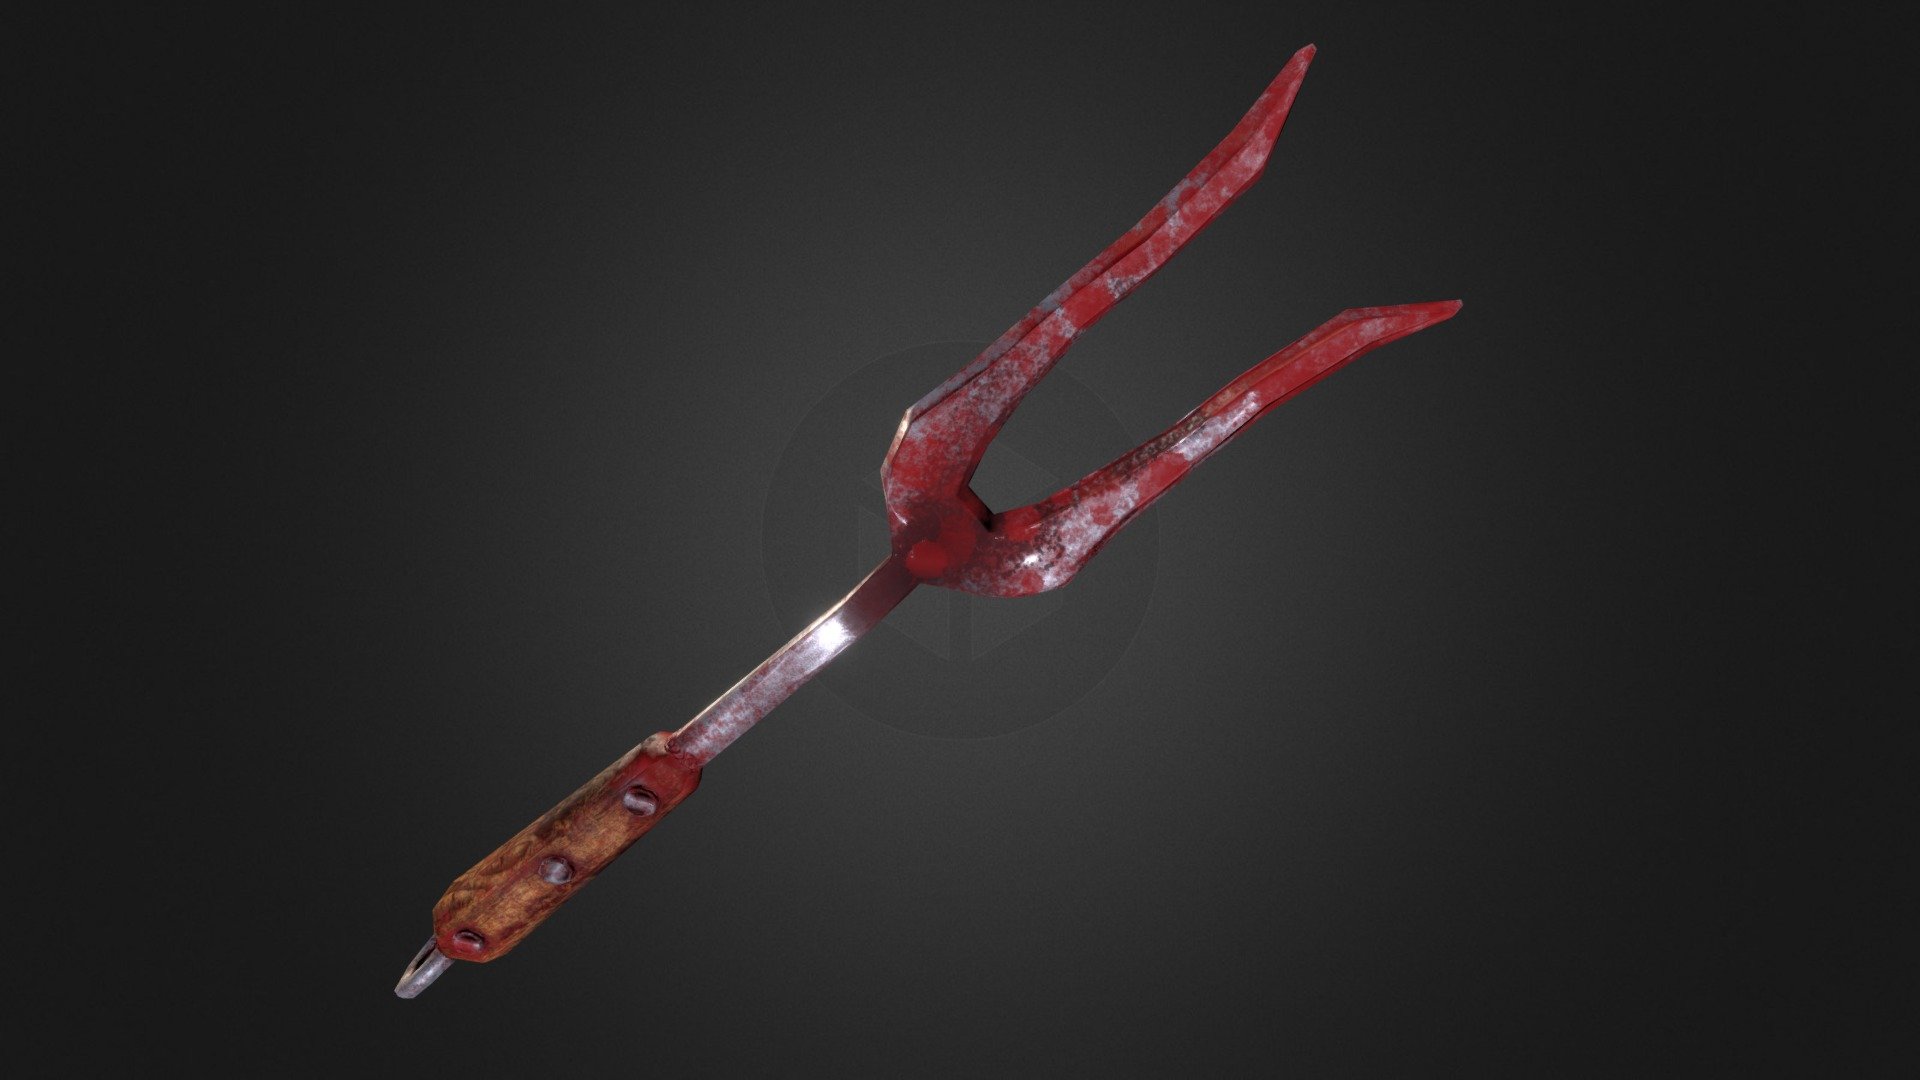 Pudge is a butcher, a lonesome insatiable cannibal. He devours the flesh from his enemies no matter when the last drop of blood floated through his snack.
He may move slowly, but be aware of chef's fork
You might be the next tidbit.

My first submitted item for the DOTA 2 Workshop 3d model